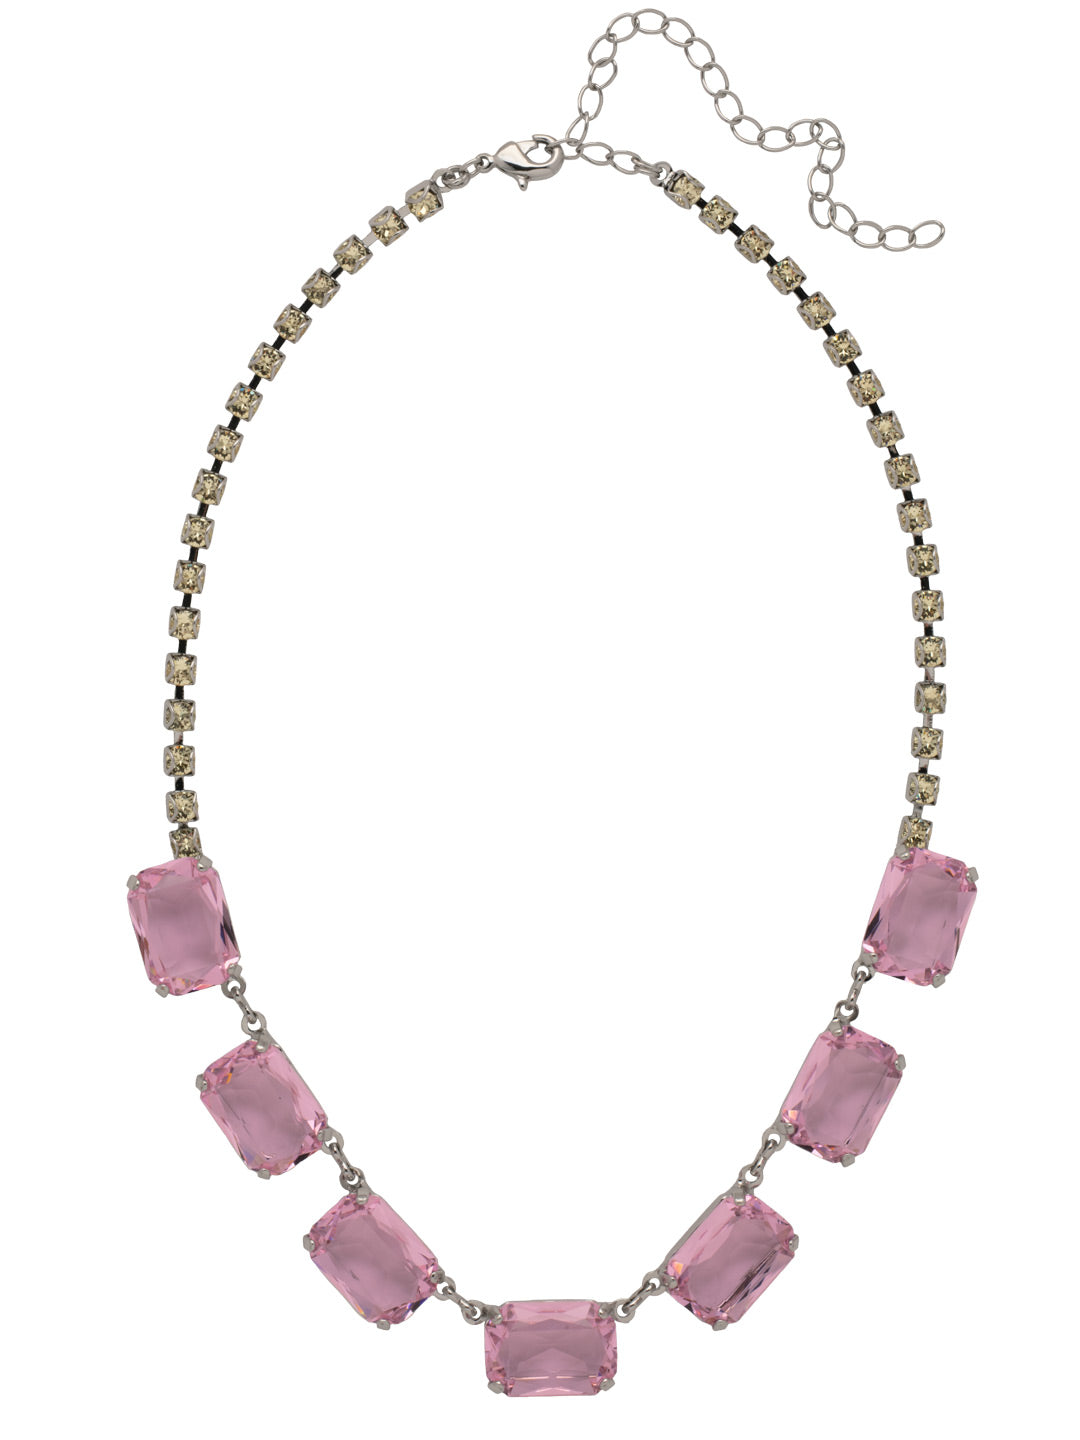 Kathleen Repeating Tennis Necklace - NFF81PDPPN - <p>The Kathleen Repeating Tennis Necklace features a row of seven emerald cut candy gem crystals on an adjustable crystal studded chain, secured by a lobster claw clasp. From Sorrelli's Pink Pineapple collection in our Palladium finish.</p>